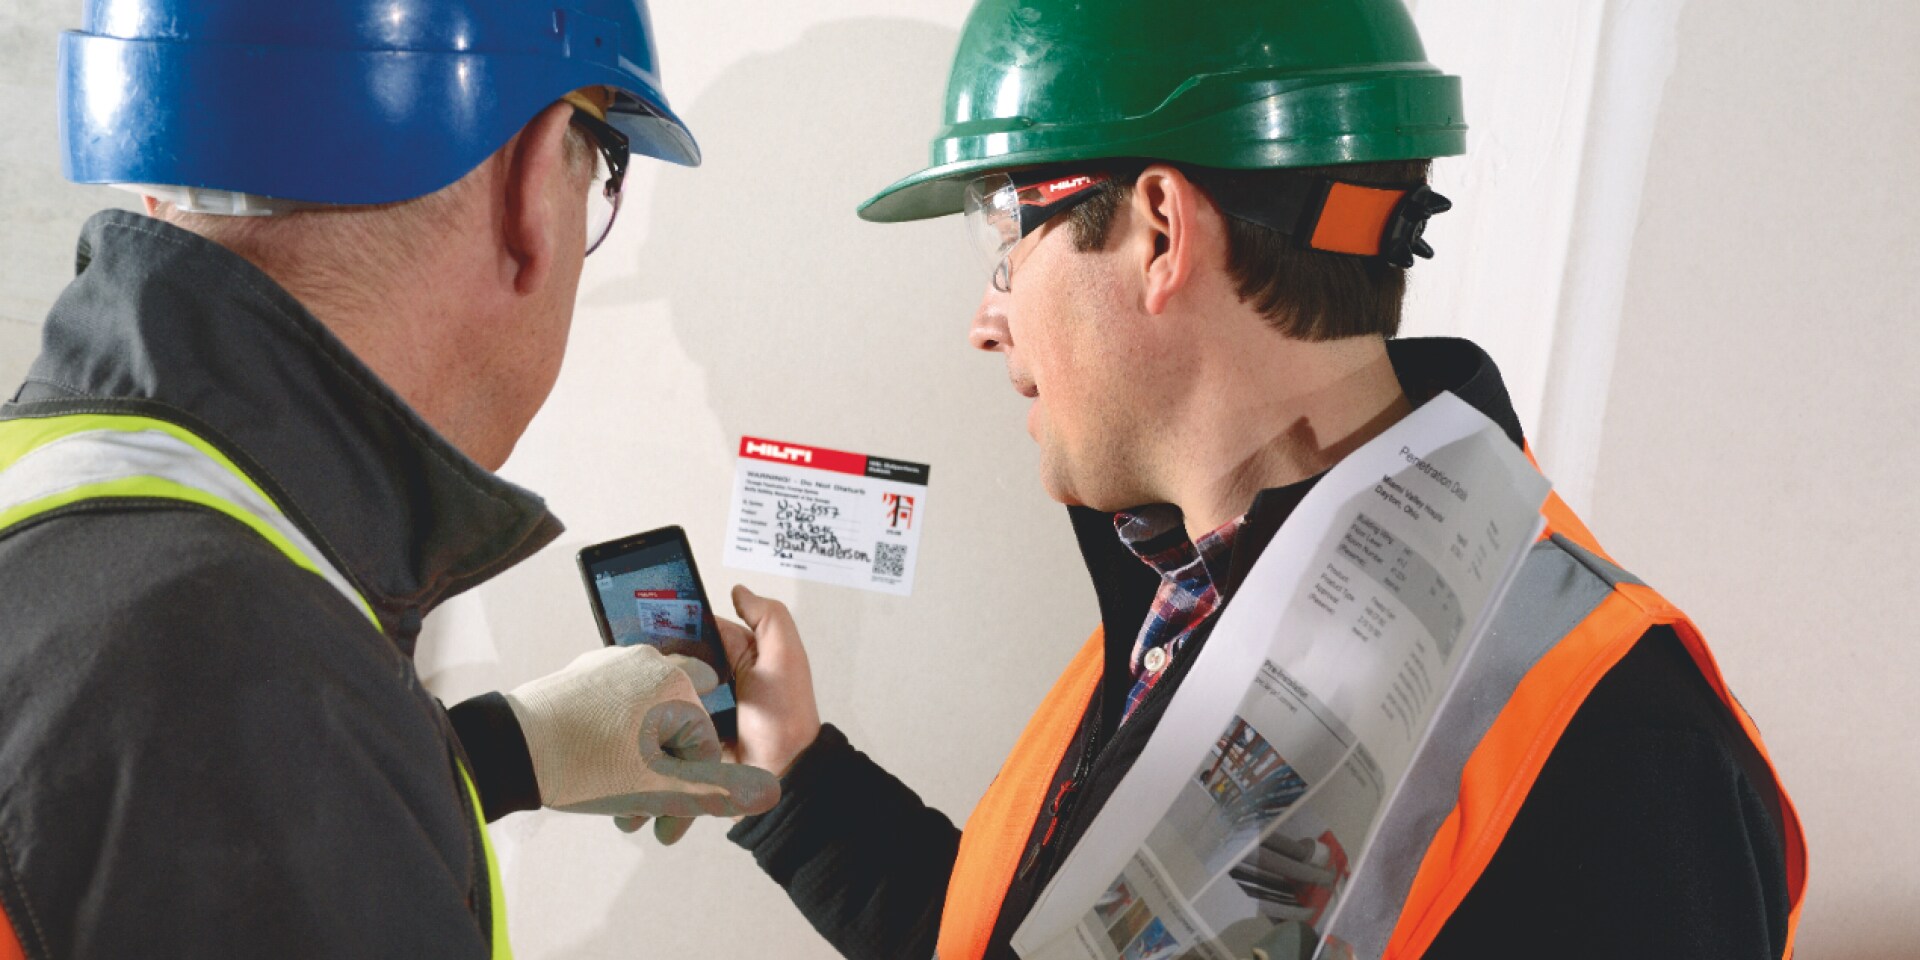 Photo of a maintenance and inspection team scanning a QR code using a mobile phone to access data on a firestop system.